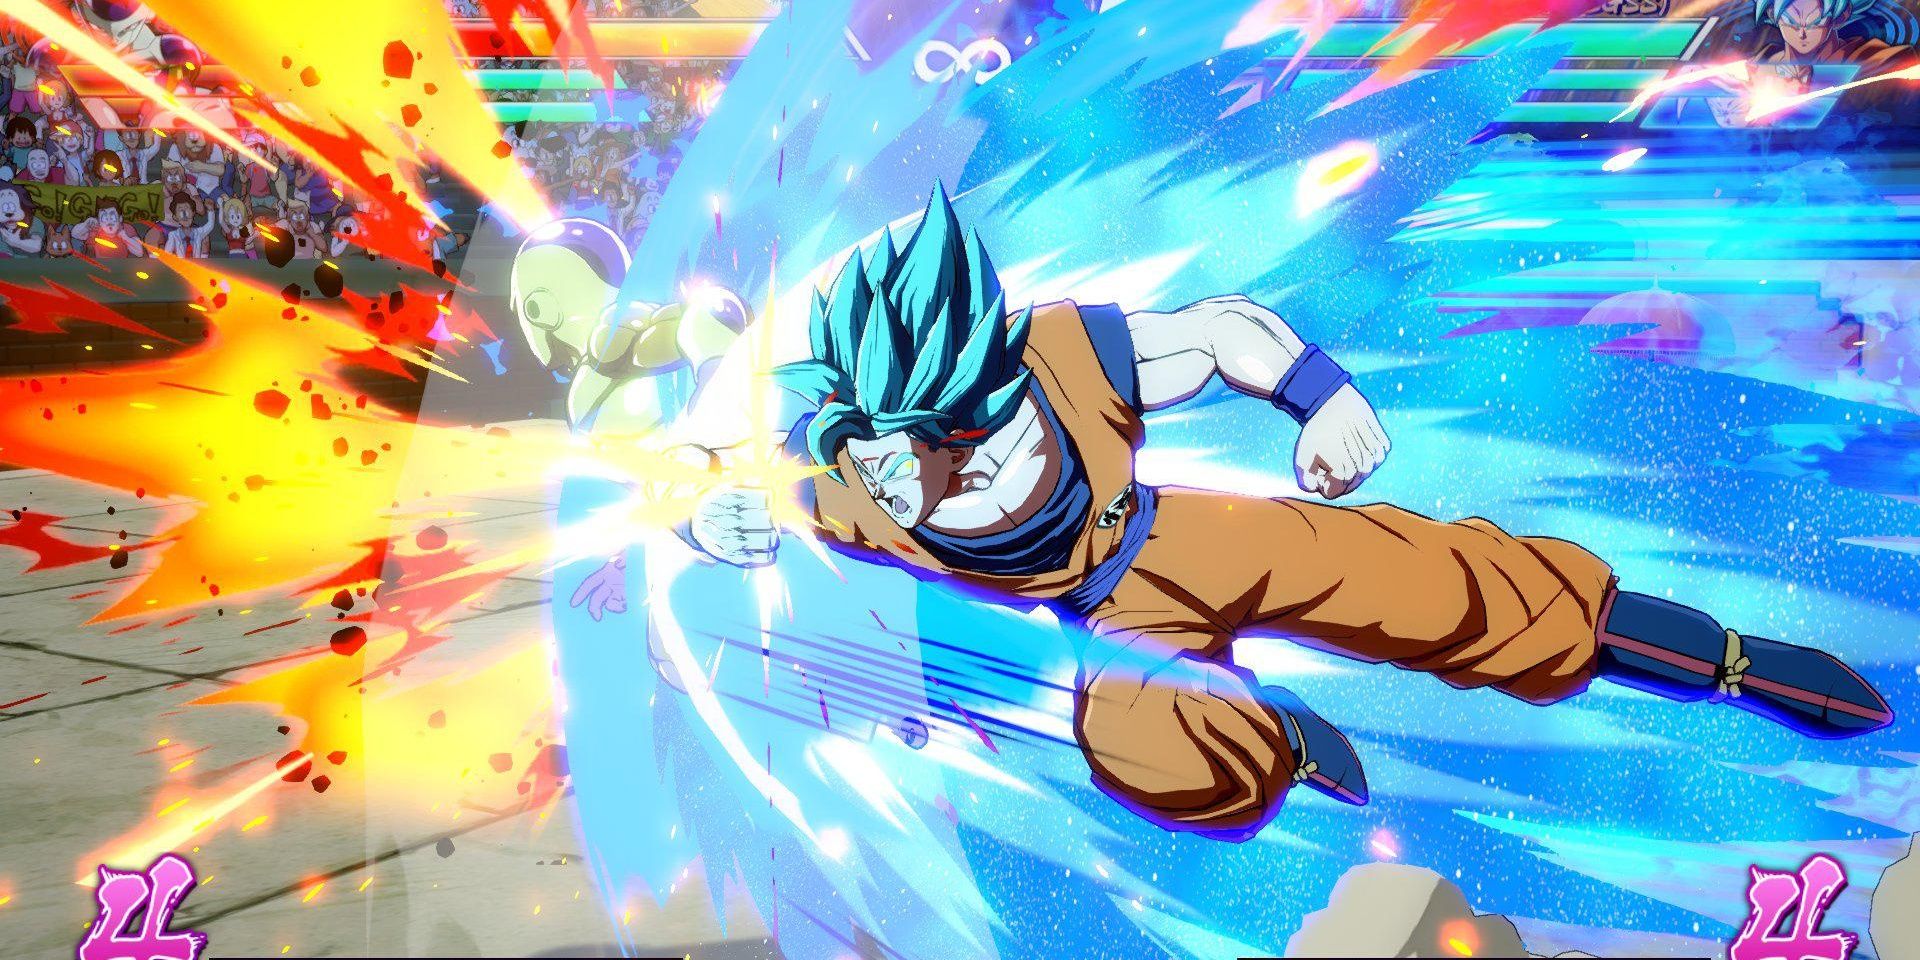 Goku using a special move in FighterZ